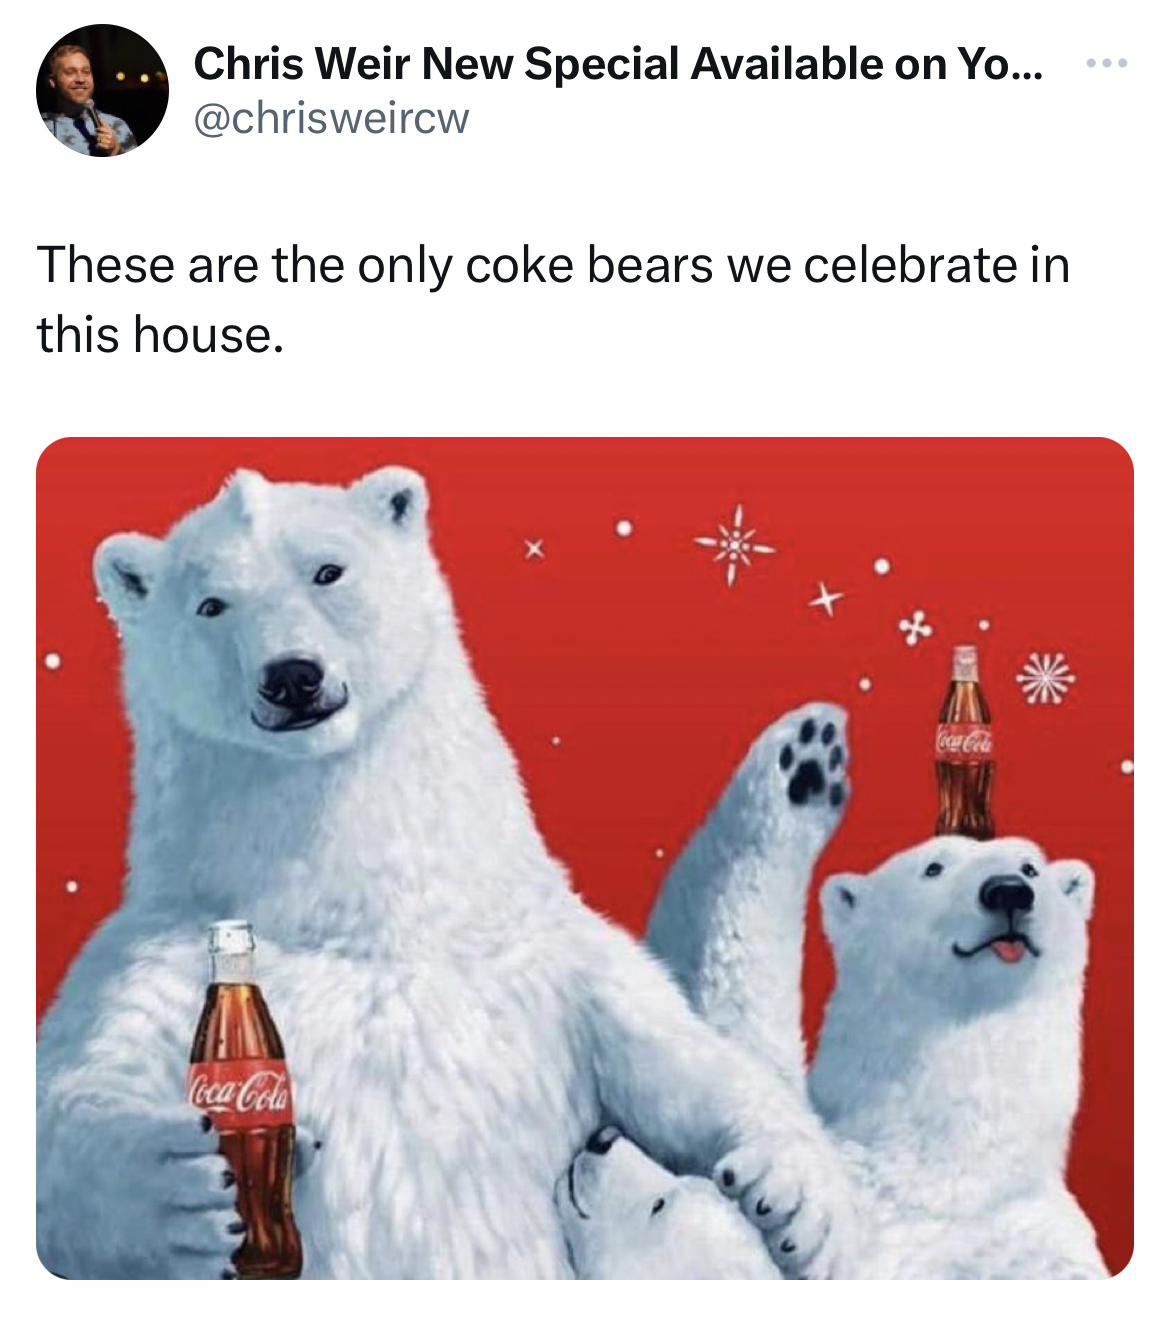 savage tweets - bait al zain mandi restaurant - Chris Weir New Special Available on Yo... These are the only coke bears we celebrate in this house. CocaCola 8